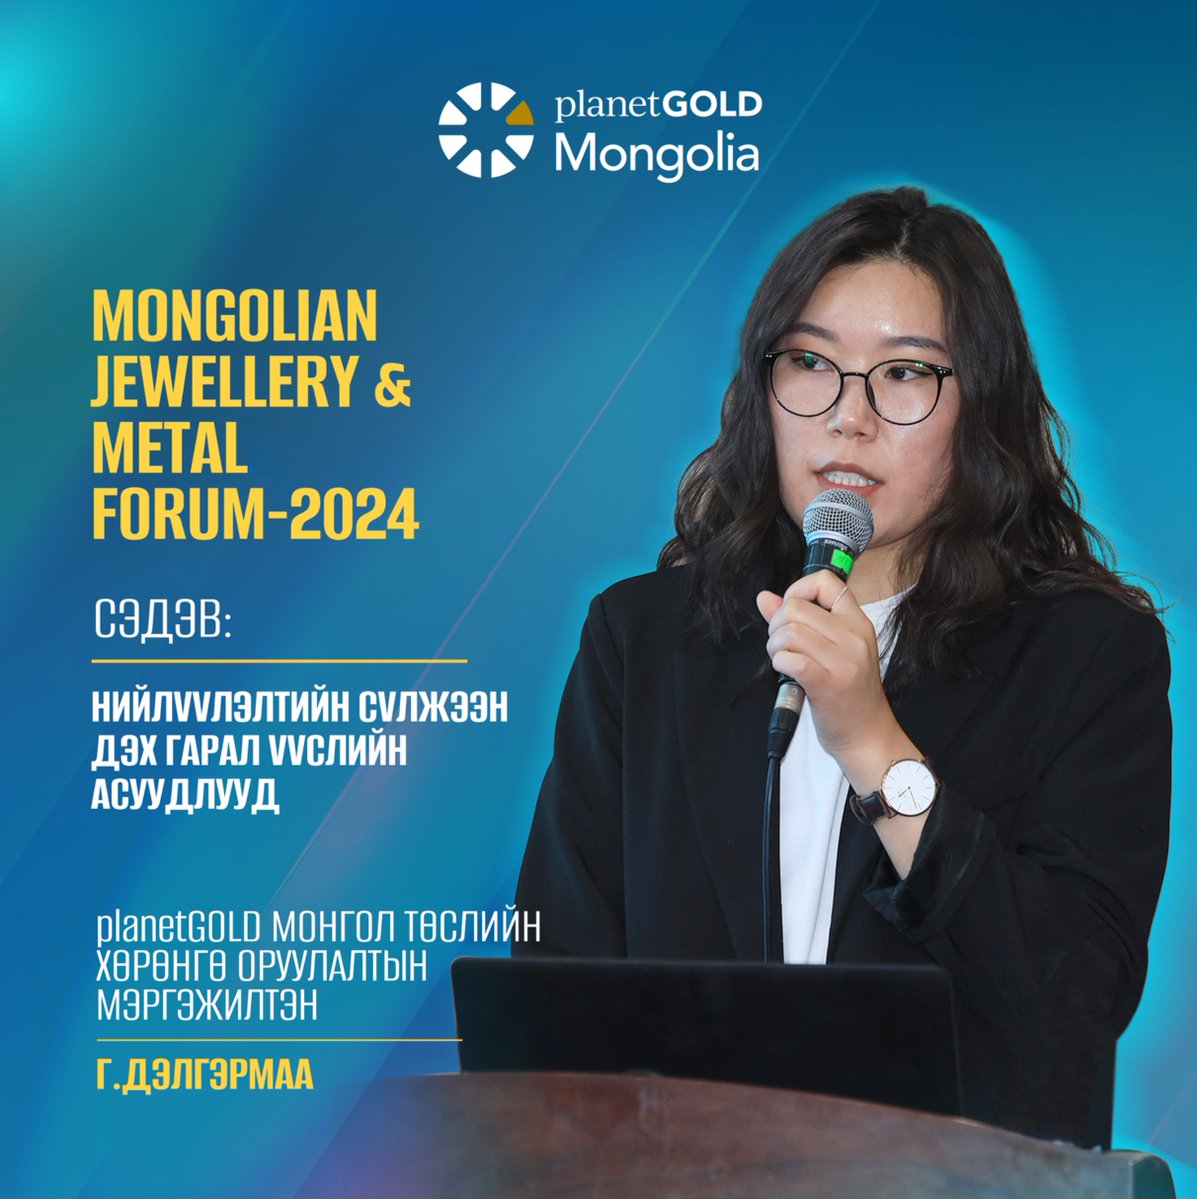 📌@planetGOLD_org Mongolia will held Mongolian Jewelry and Metal Forum for 3rd year on April 11 in Ulaanbaatar, Mongolia, in collaboration with @FRC_of_Mongolia and Precious Metal Traders National Association. Representatives of project will deliver presentations @artisanal_gold